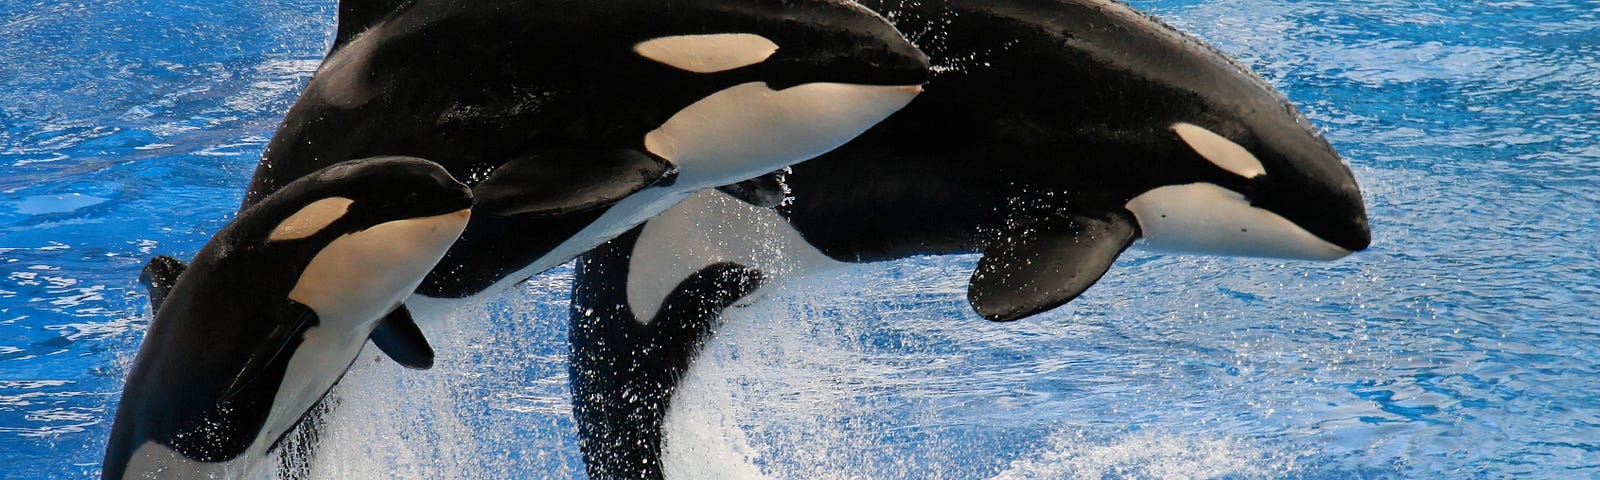 two adult and a baby orca are jumping out of the water